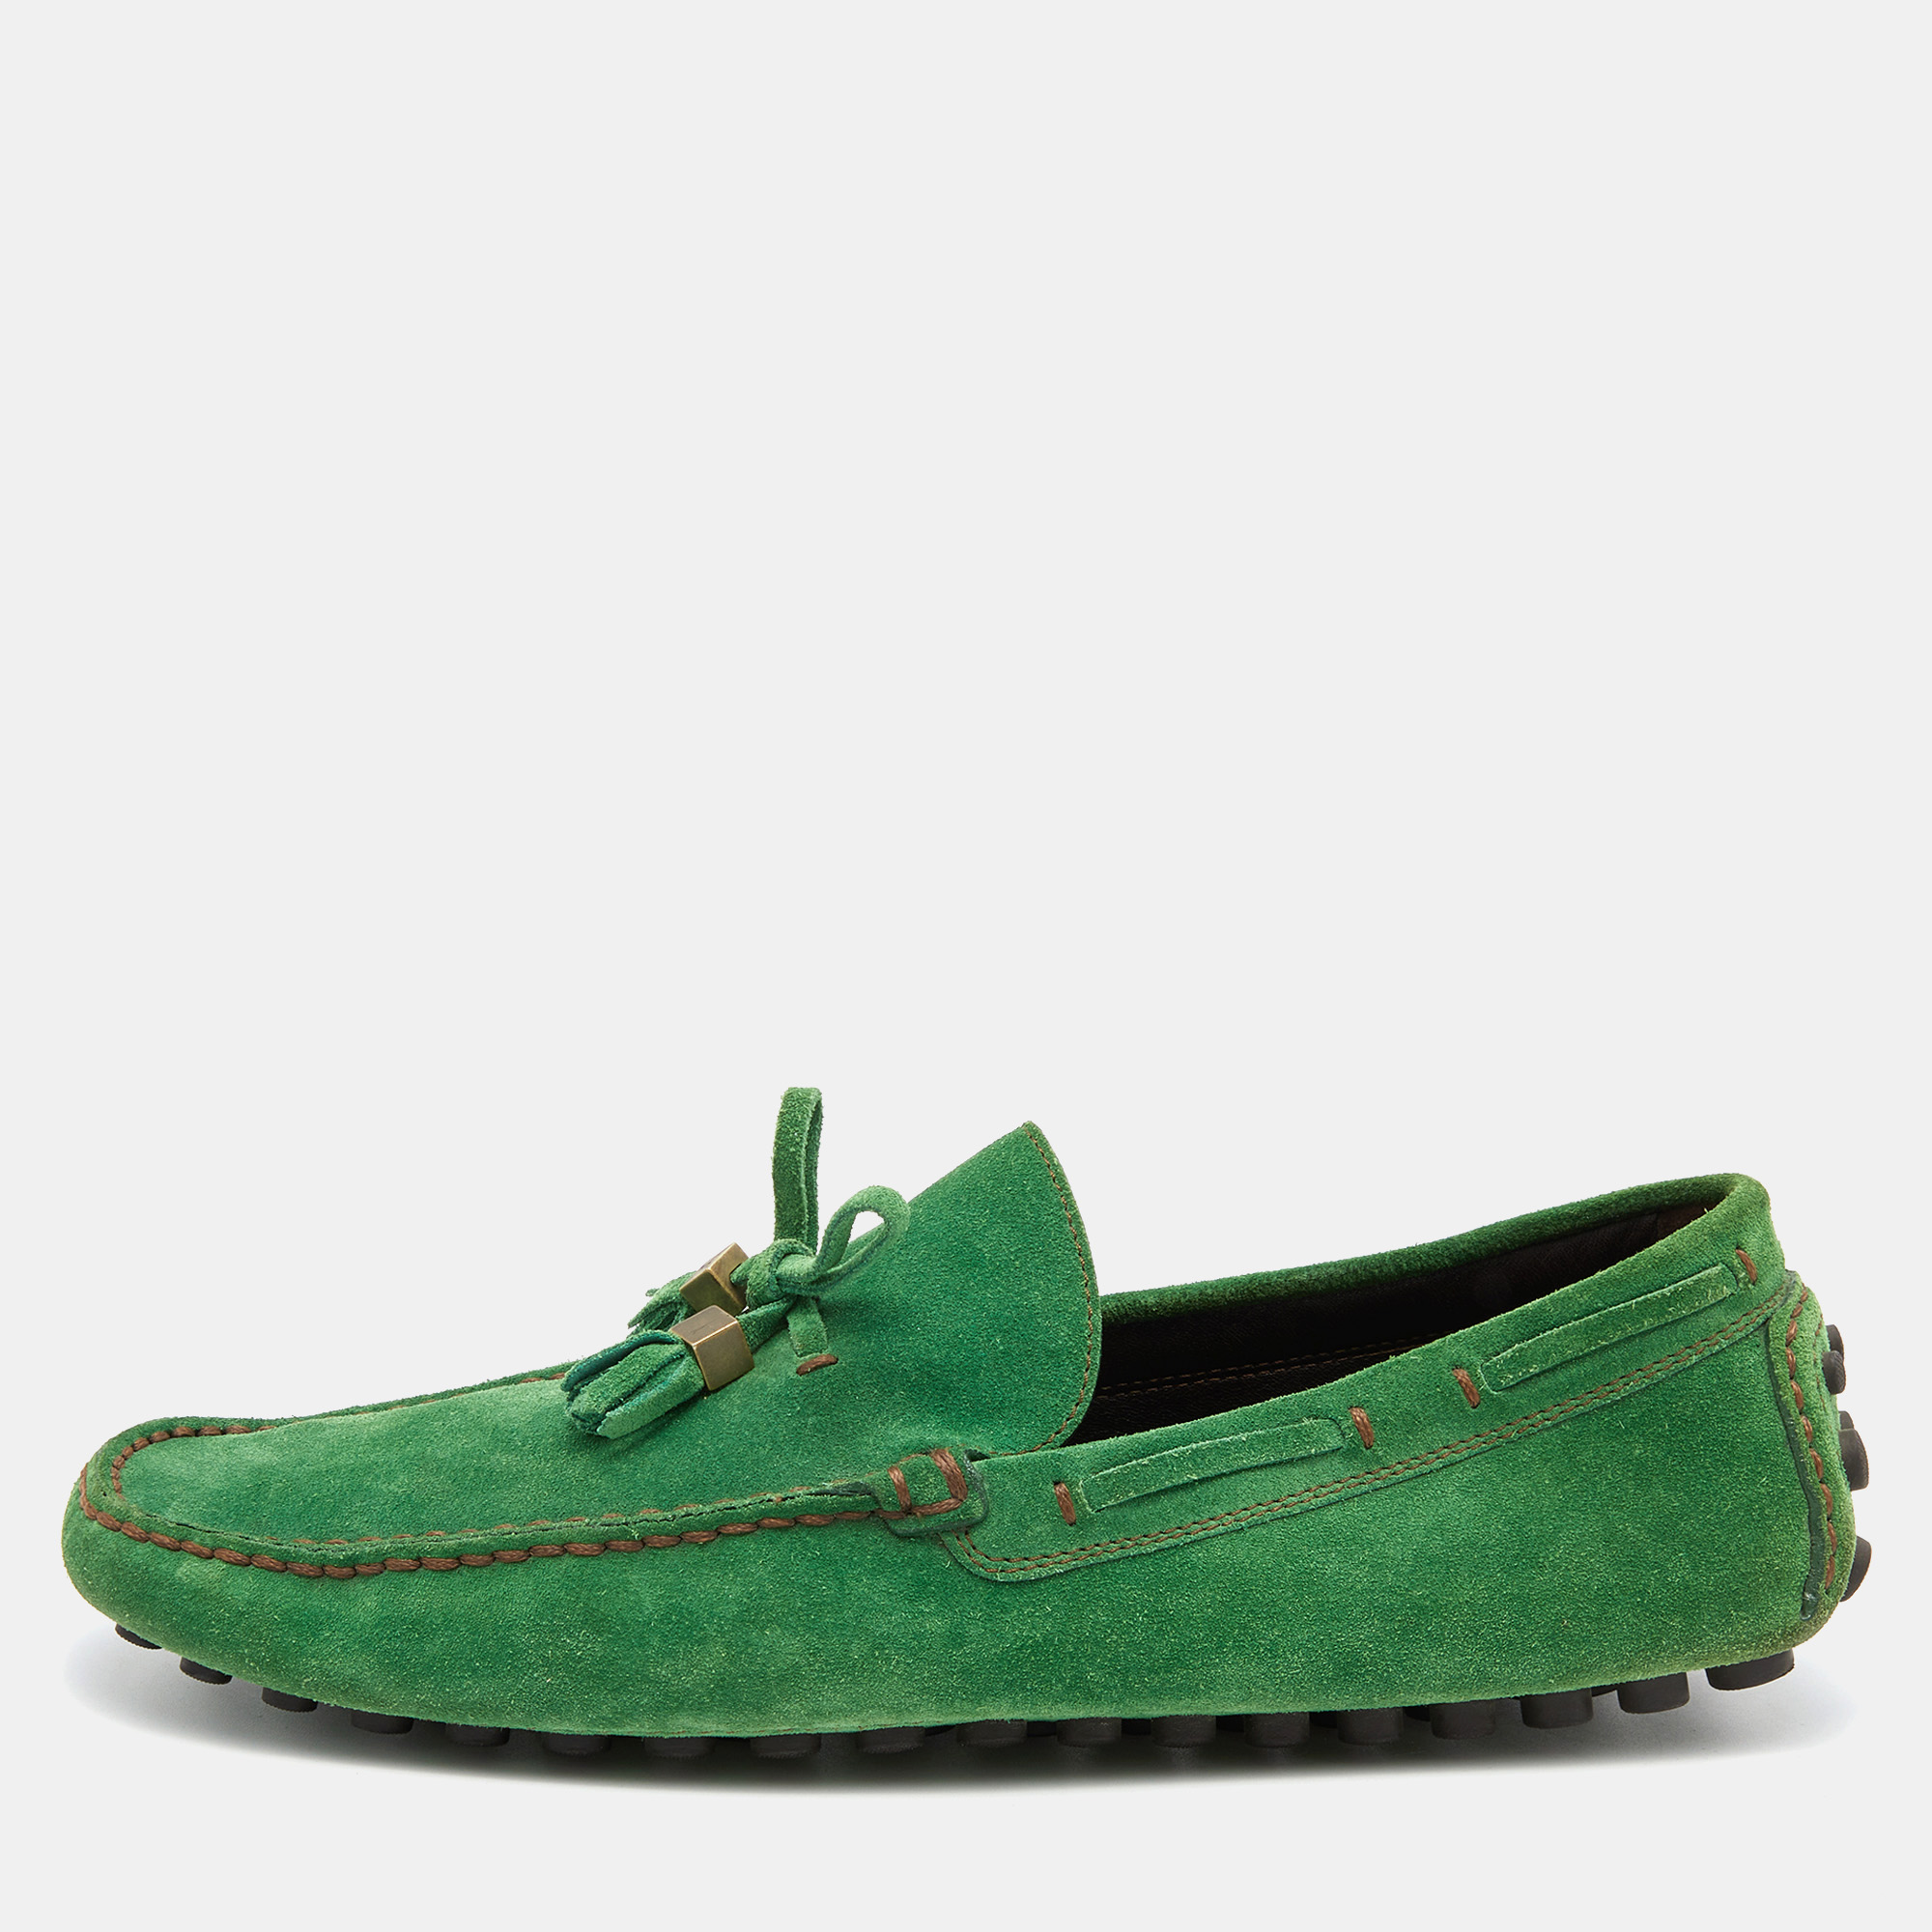 Louis vuitton green suede imola tassel slip on loafers size 41.5